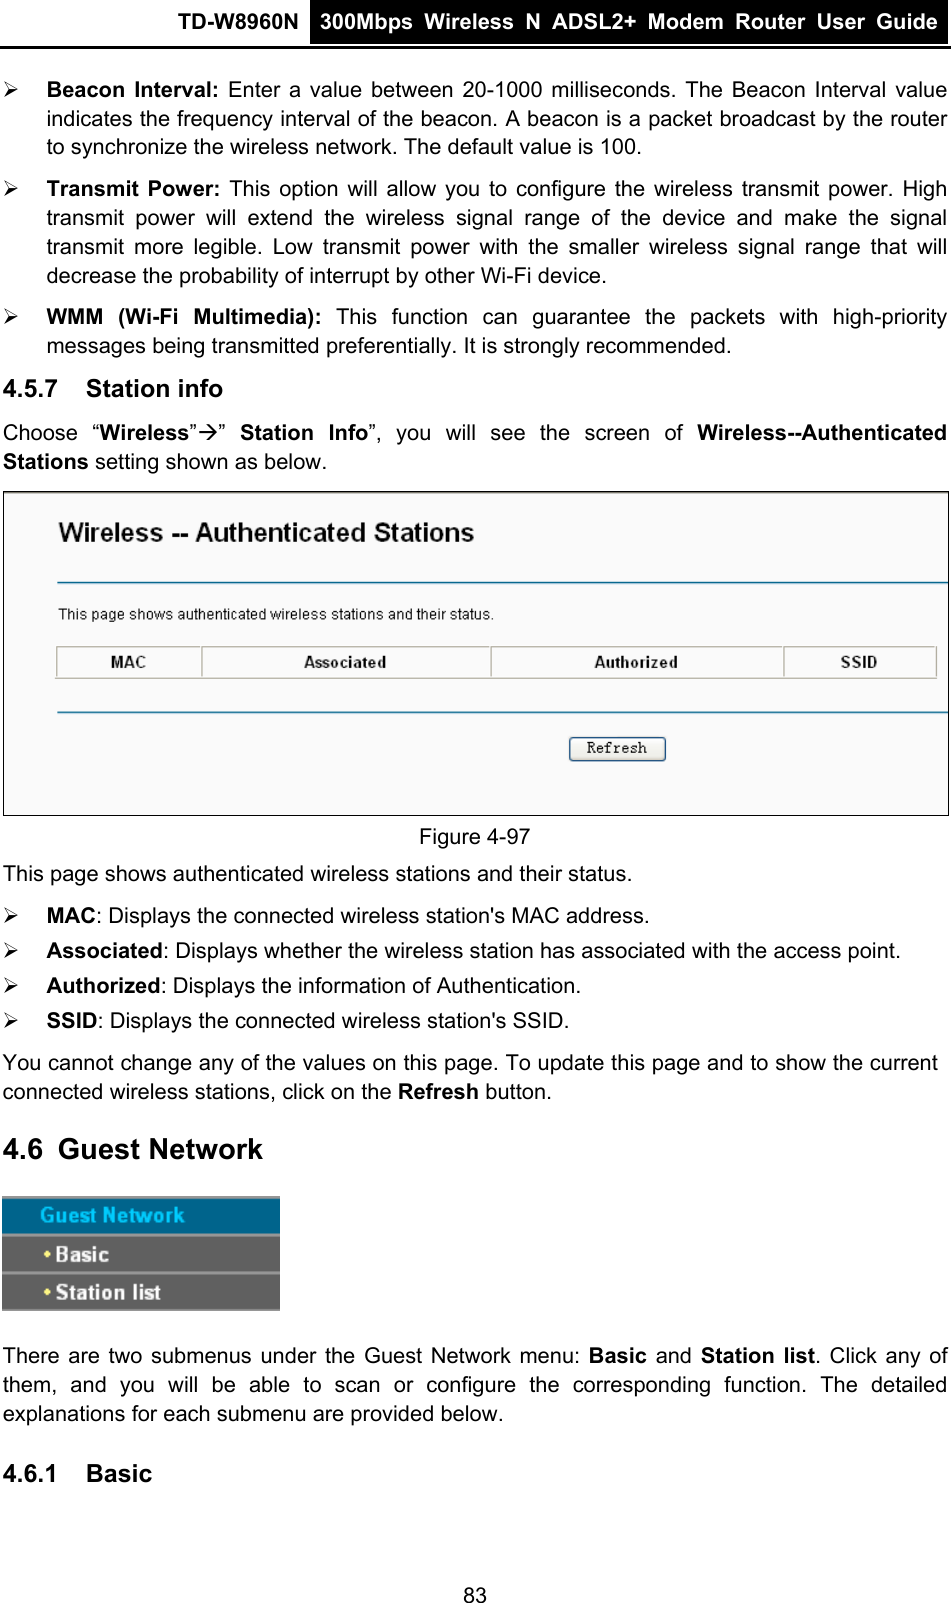 TD-W8960N  300Mbps Wireless N ADSL2+ Modem Router User Guide   Beacon Interval: Enter a value between 20-1000 milliseconds. The Beacon Interval value indicates the frequency interval of the beacon. A beacon is a packet broadcast by the router to synchronize the wireless network. The default value is 100.  Transmit Power: This option will allow you to configure the wireless transmit power. High transmit power will extend the wireless signal range of the device and make the signal transmit more legible. Low transmit power with the smaller wireless signal range that will decrease the probability of interrupt by other Wi-Fi device.  WMM (Wi-Fi Multimedia): This function can guarantee the packets with high-priority messages being transmitted preferentially. It is strongly recommended. 4.5.7  Station info Choose “Wireless””  Station Info”, you will see the screen of Wireless--Authenticated Stations setting shown as below.  Figure 4-97 This page shows authenticated wireless stations and their status.  MAC: Displays the connected wireless station&apos;s MAC address.  Associated: Displays whether the wireless station has associated with the access point.  Authorized: Displays the information of Authentication.  SSID: Displays the connected wireless station&apos;s SSID. You cannot change any of the values on this page. To update this page and to show the current connected wireless stations, click on the Refresh button.   4.6  Guest Network  There are two submenus under the Guest Network menu: Basic  and Station list. Click any of them, and you will be able to scan or configure the corresponding function. The detailed explanations for each submenu are provided below. 4.6.1  Basic 83 